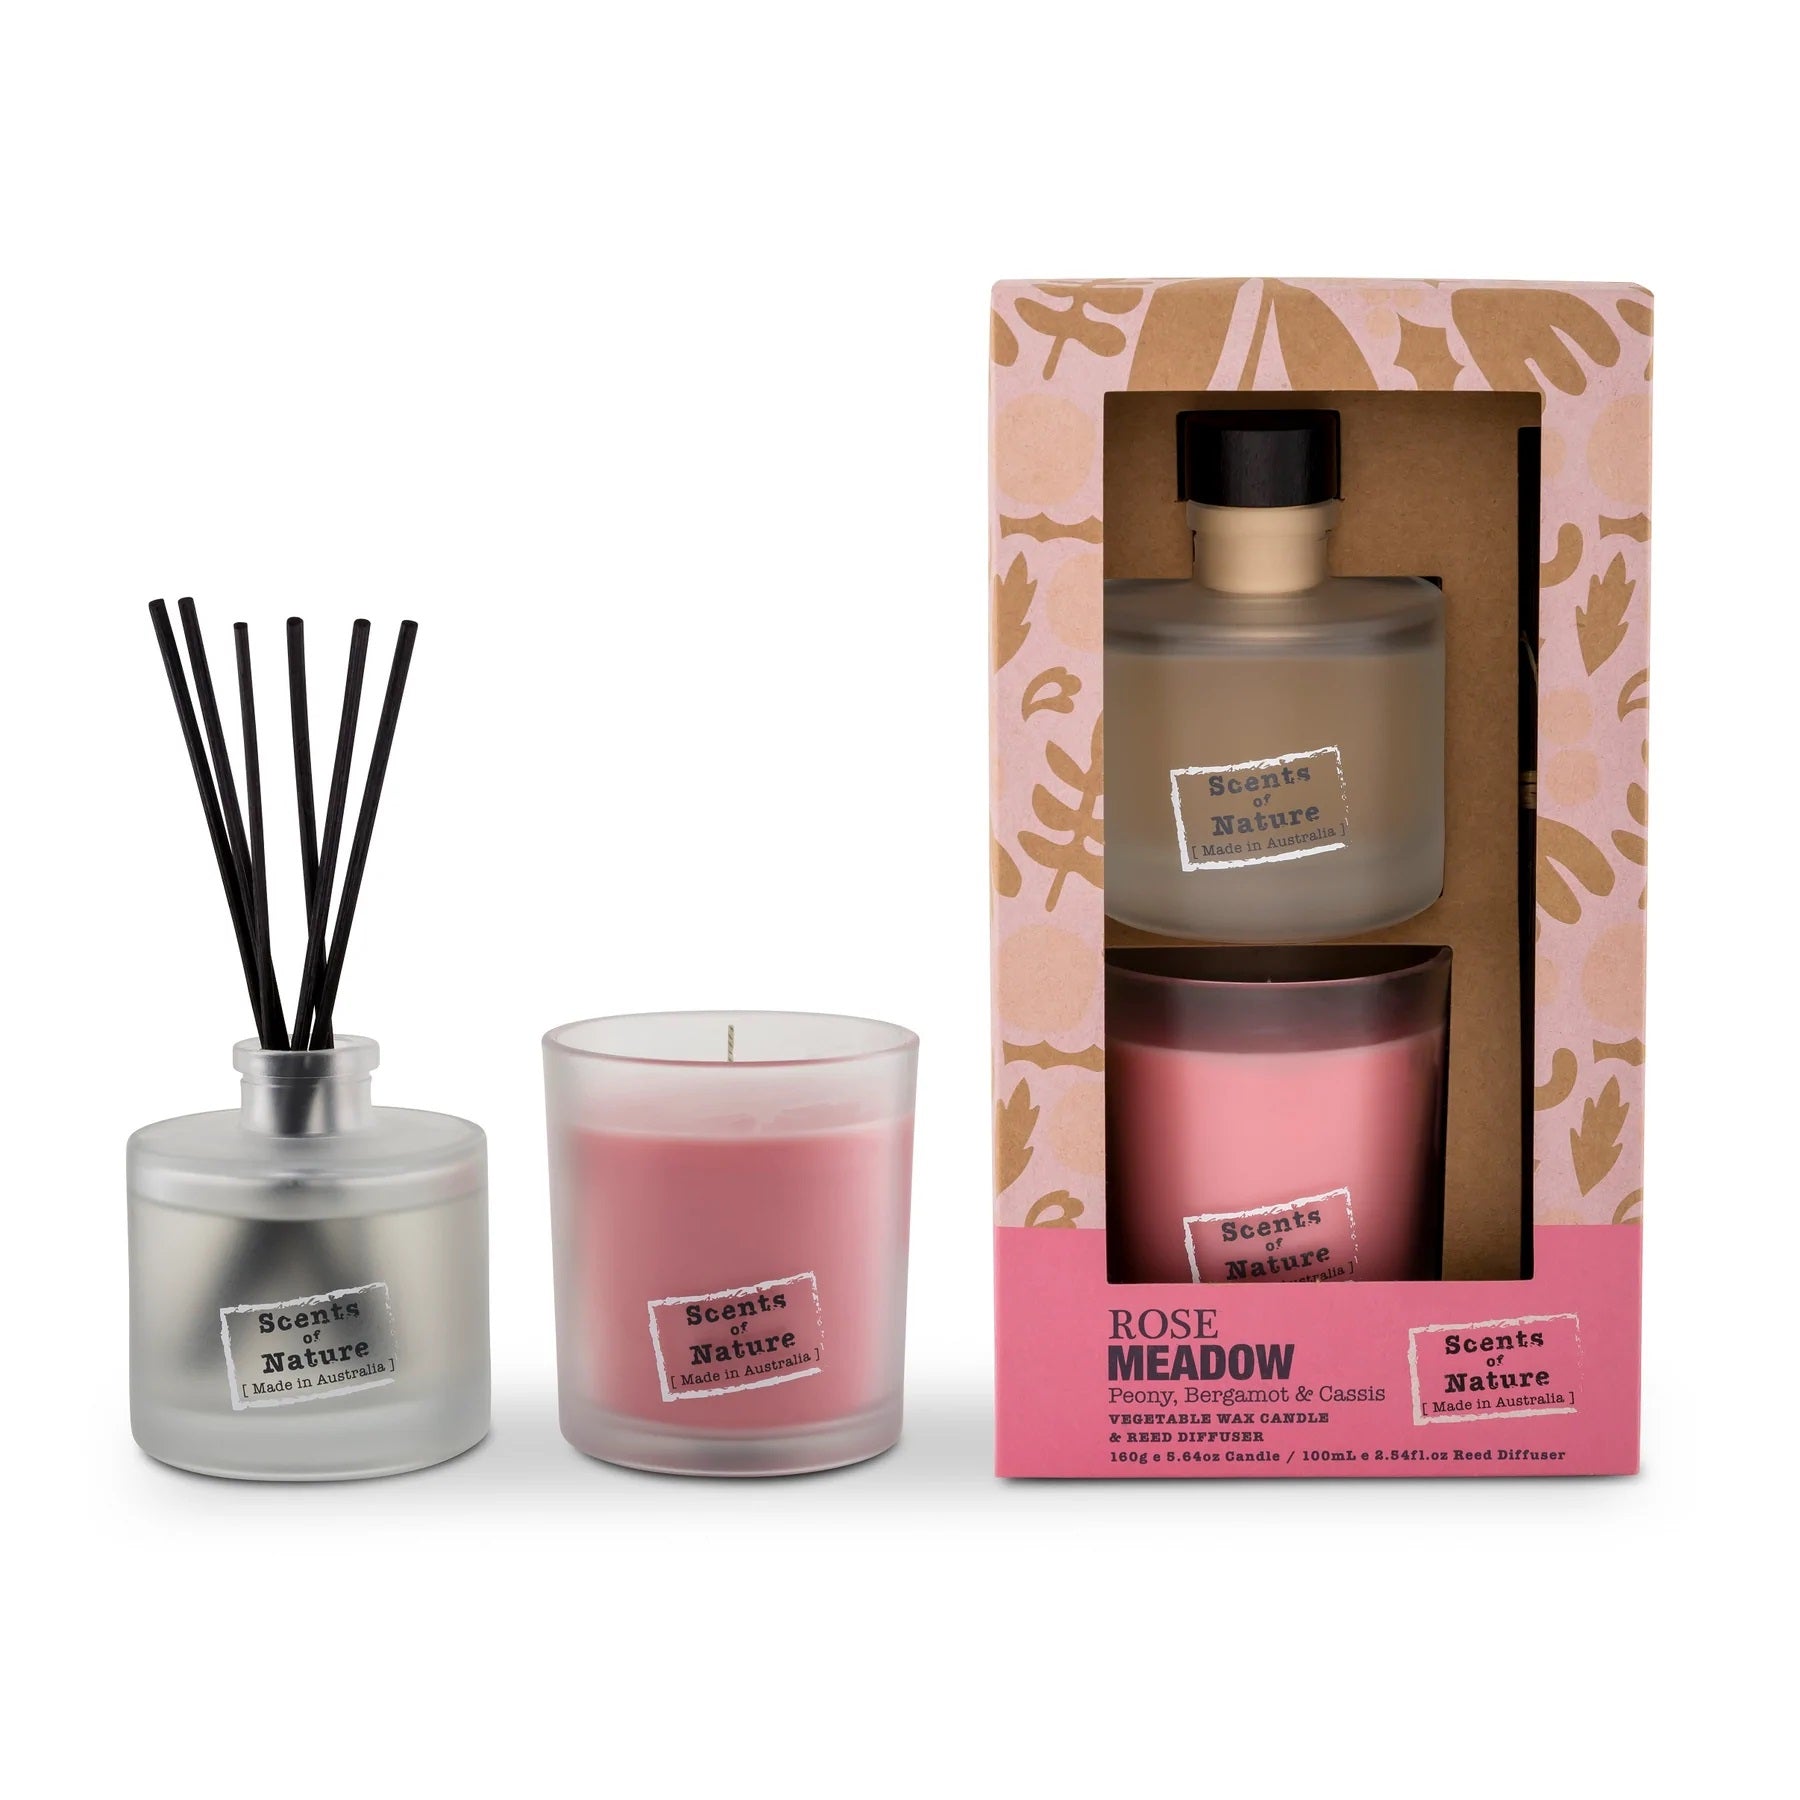 Rose Meadow Candle & Reed Gift Set